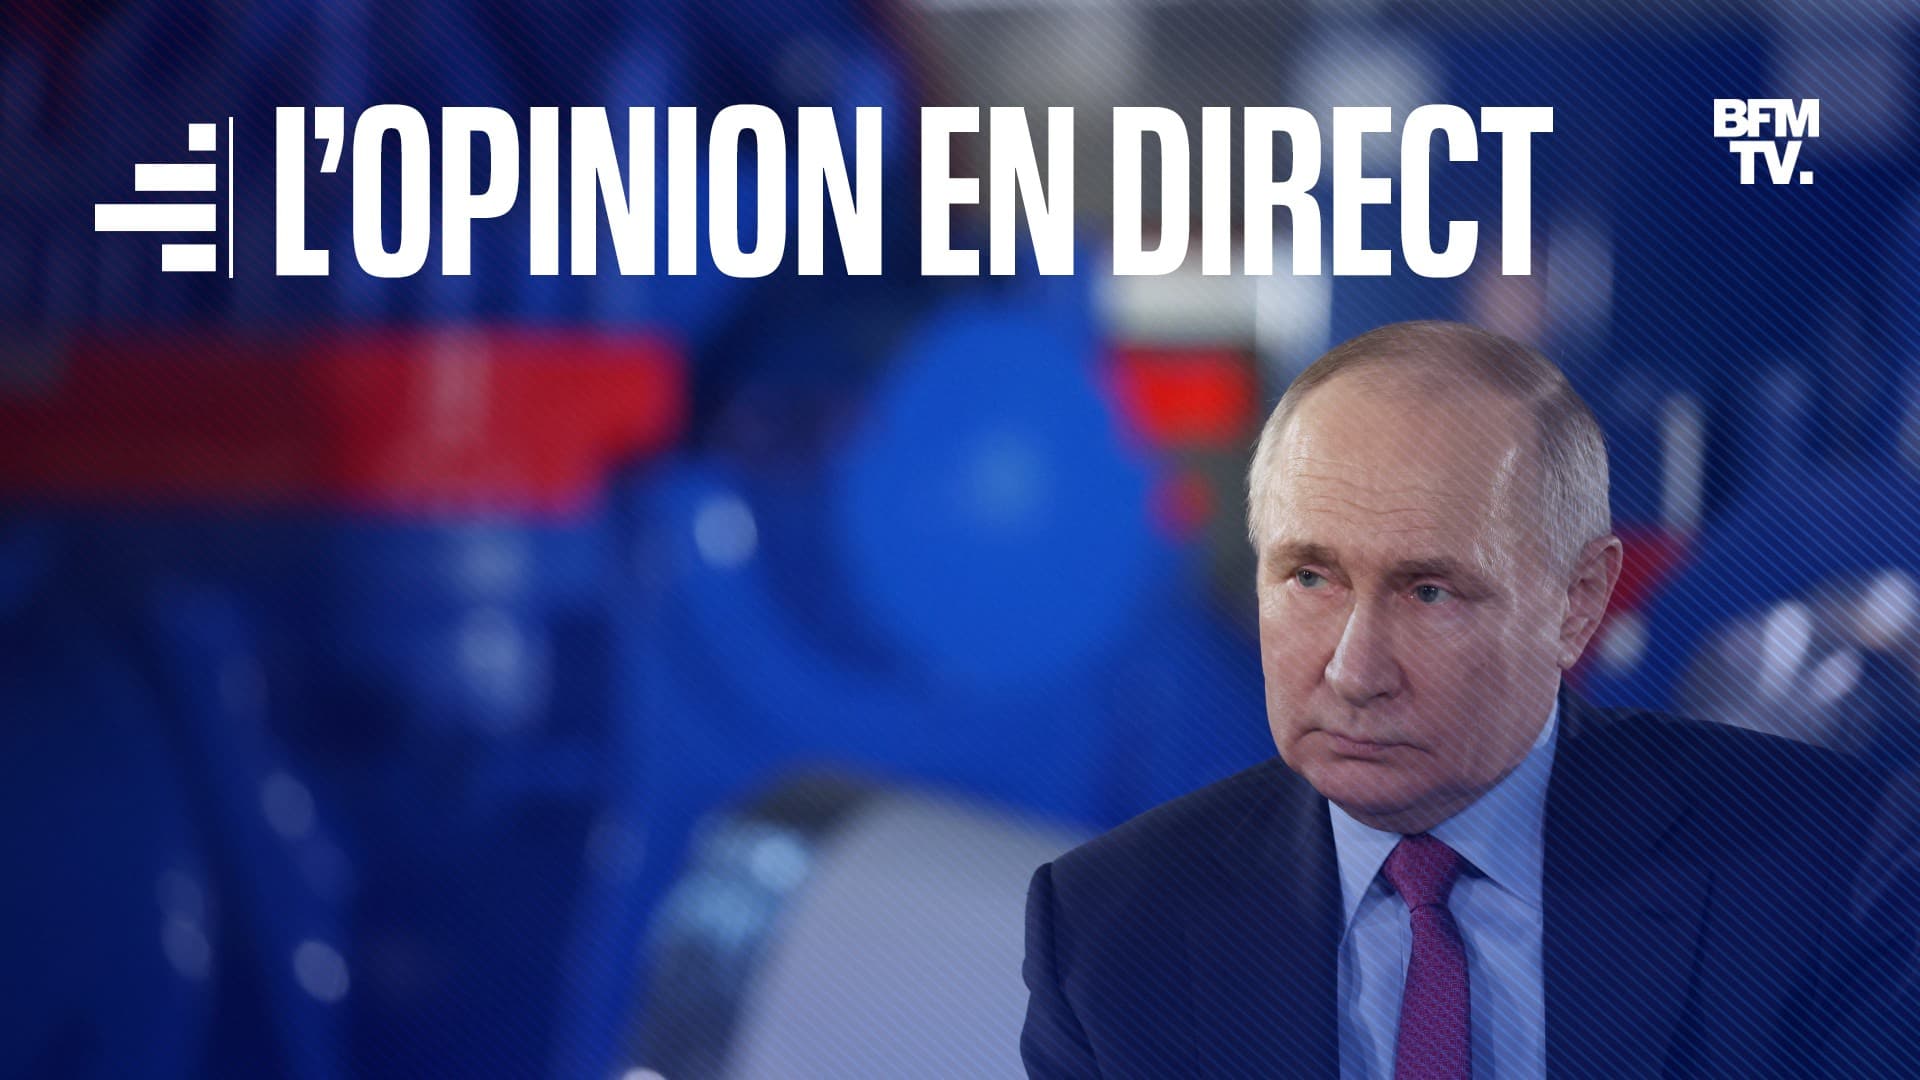 61% of French people believe Vladimir Putin is a threat to France